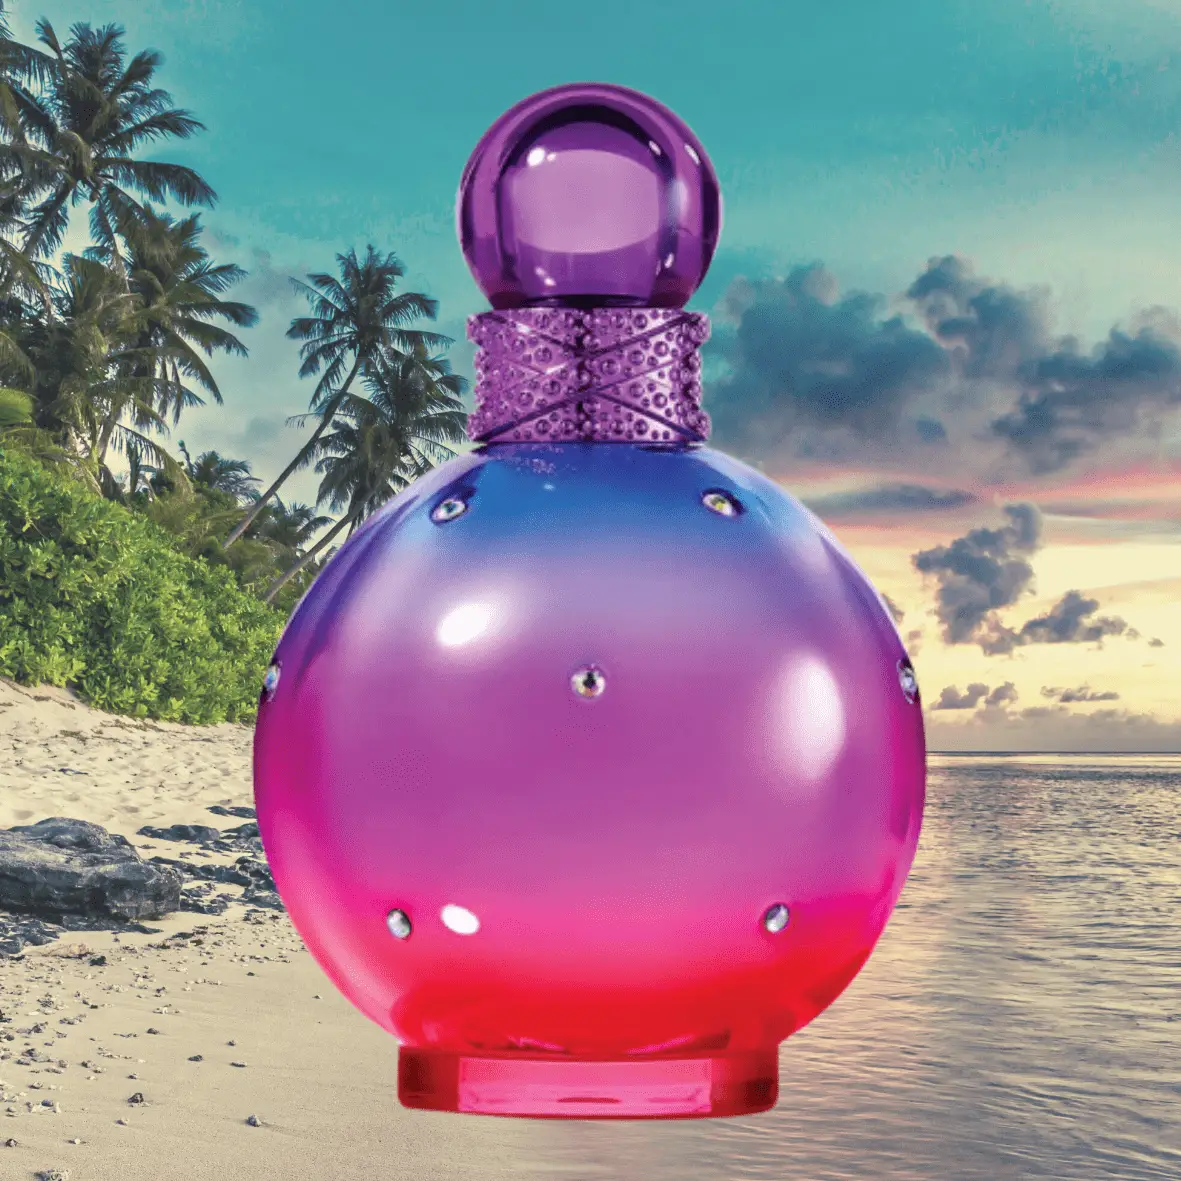 Britney spears electric fantasy The Top 7 Best Passionfruit Perfumes